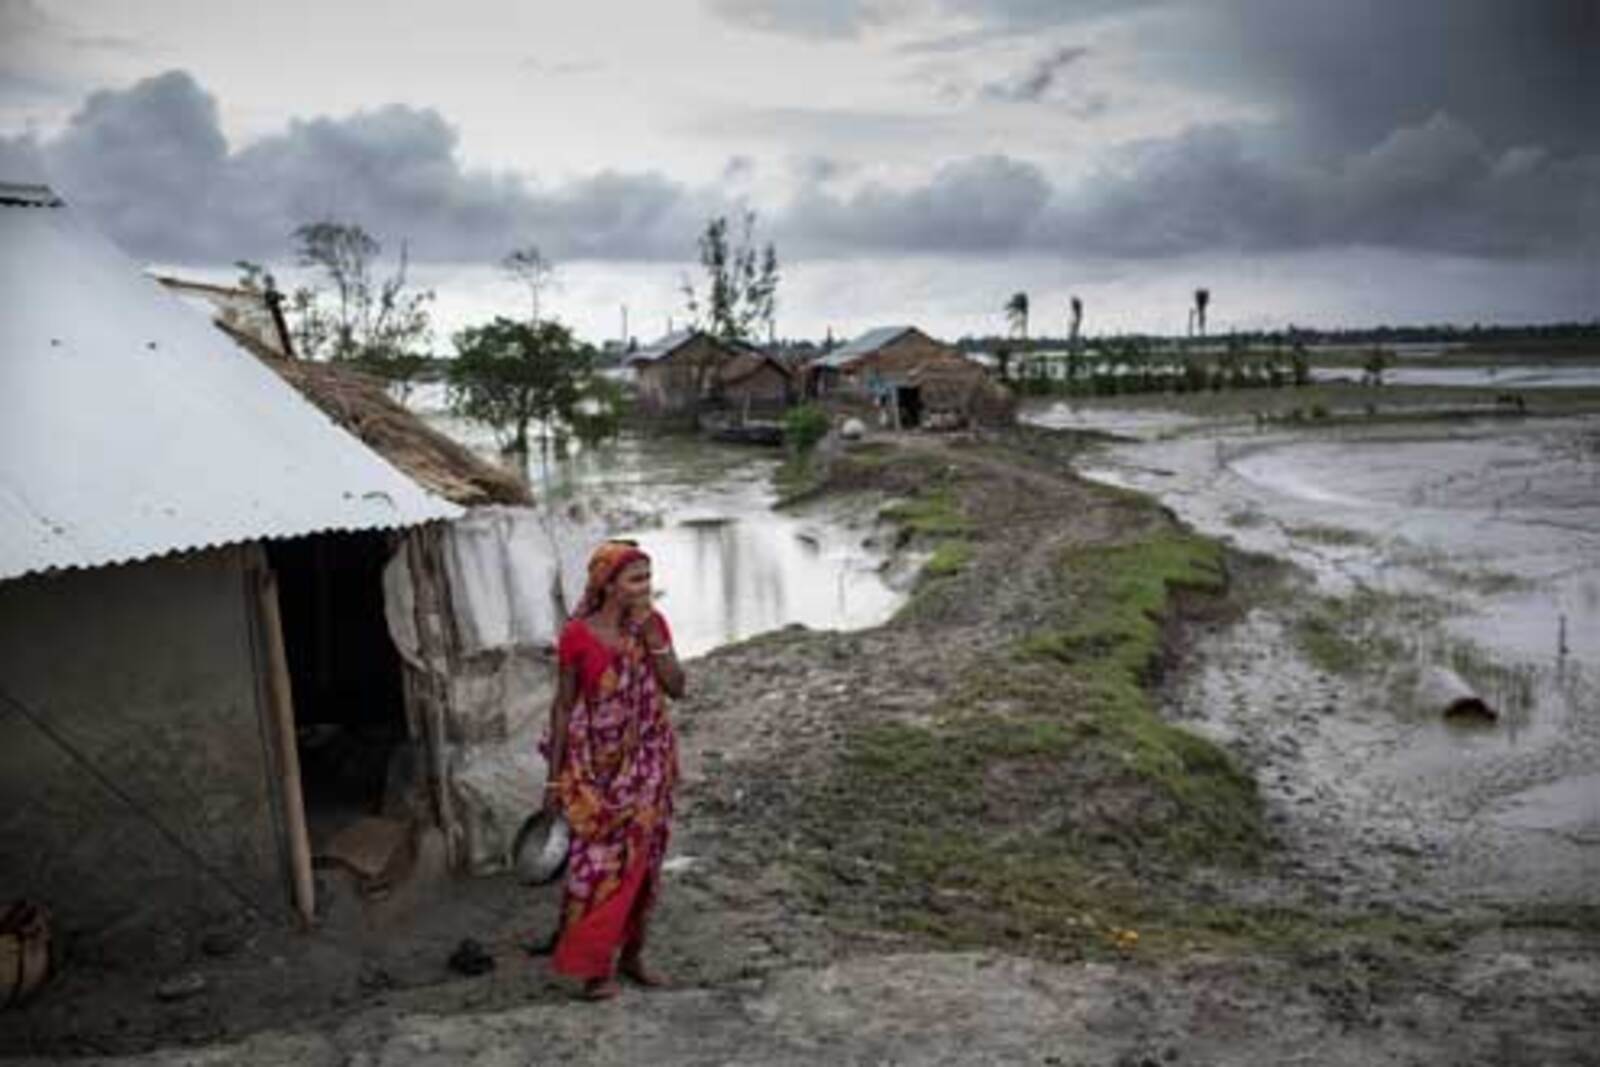 In South and Southeast Asia, 250 million poor rural people live in the low-lying river megadeltas such as this southern region in Bangladesh. Photo/Conor Ashleigh